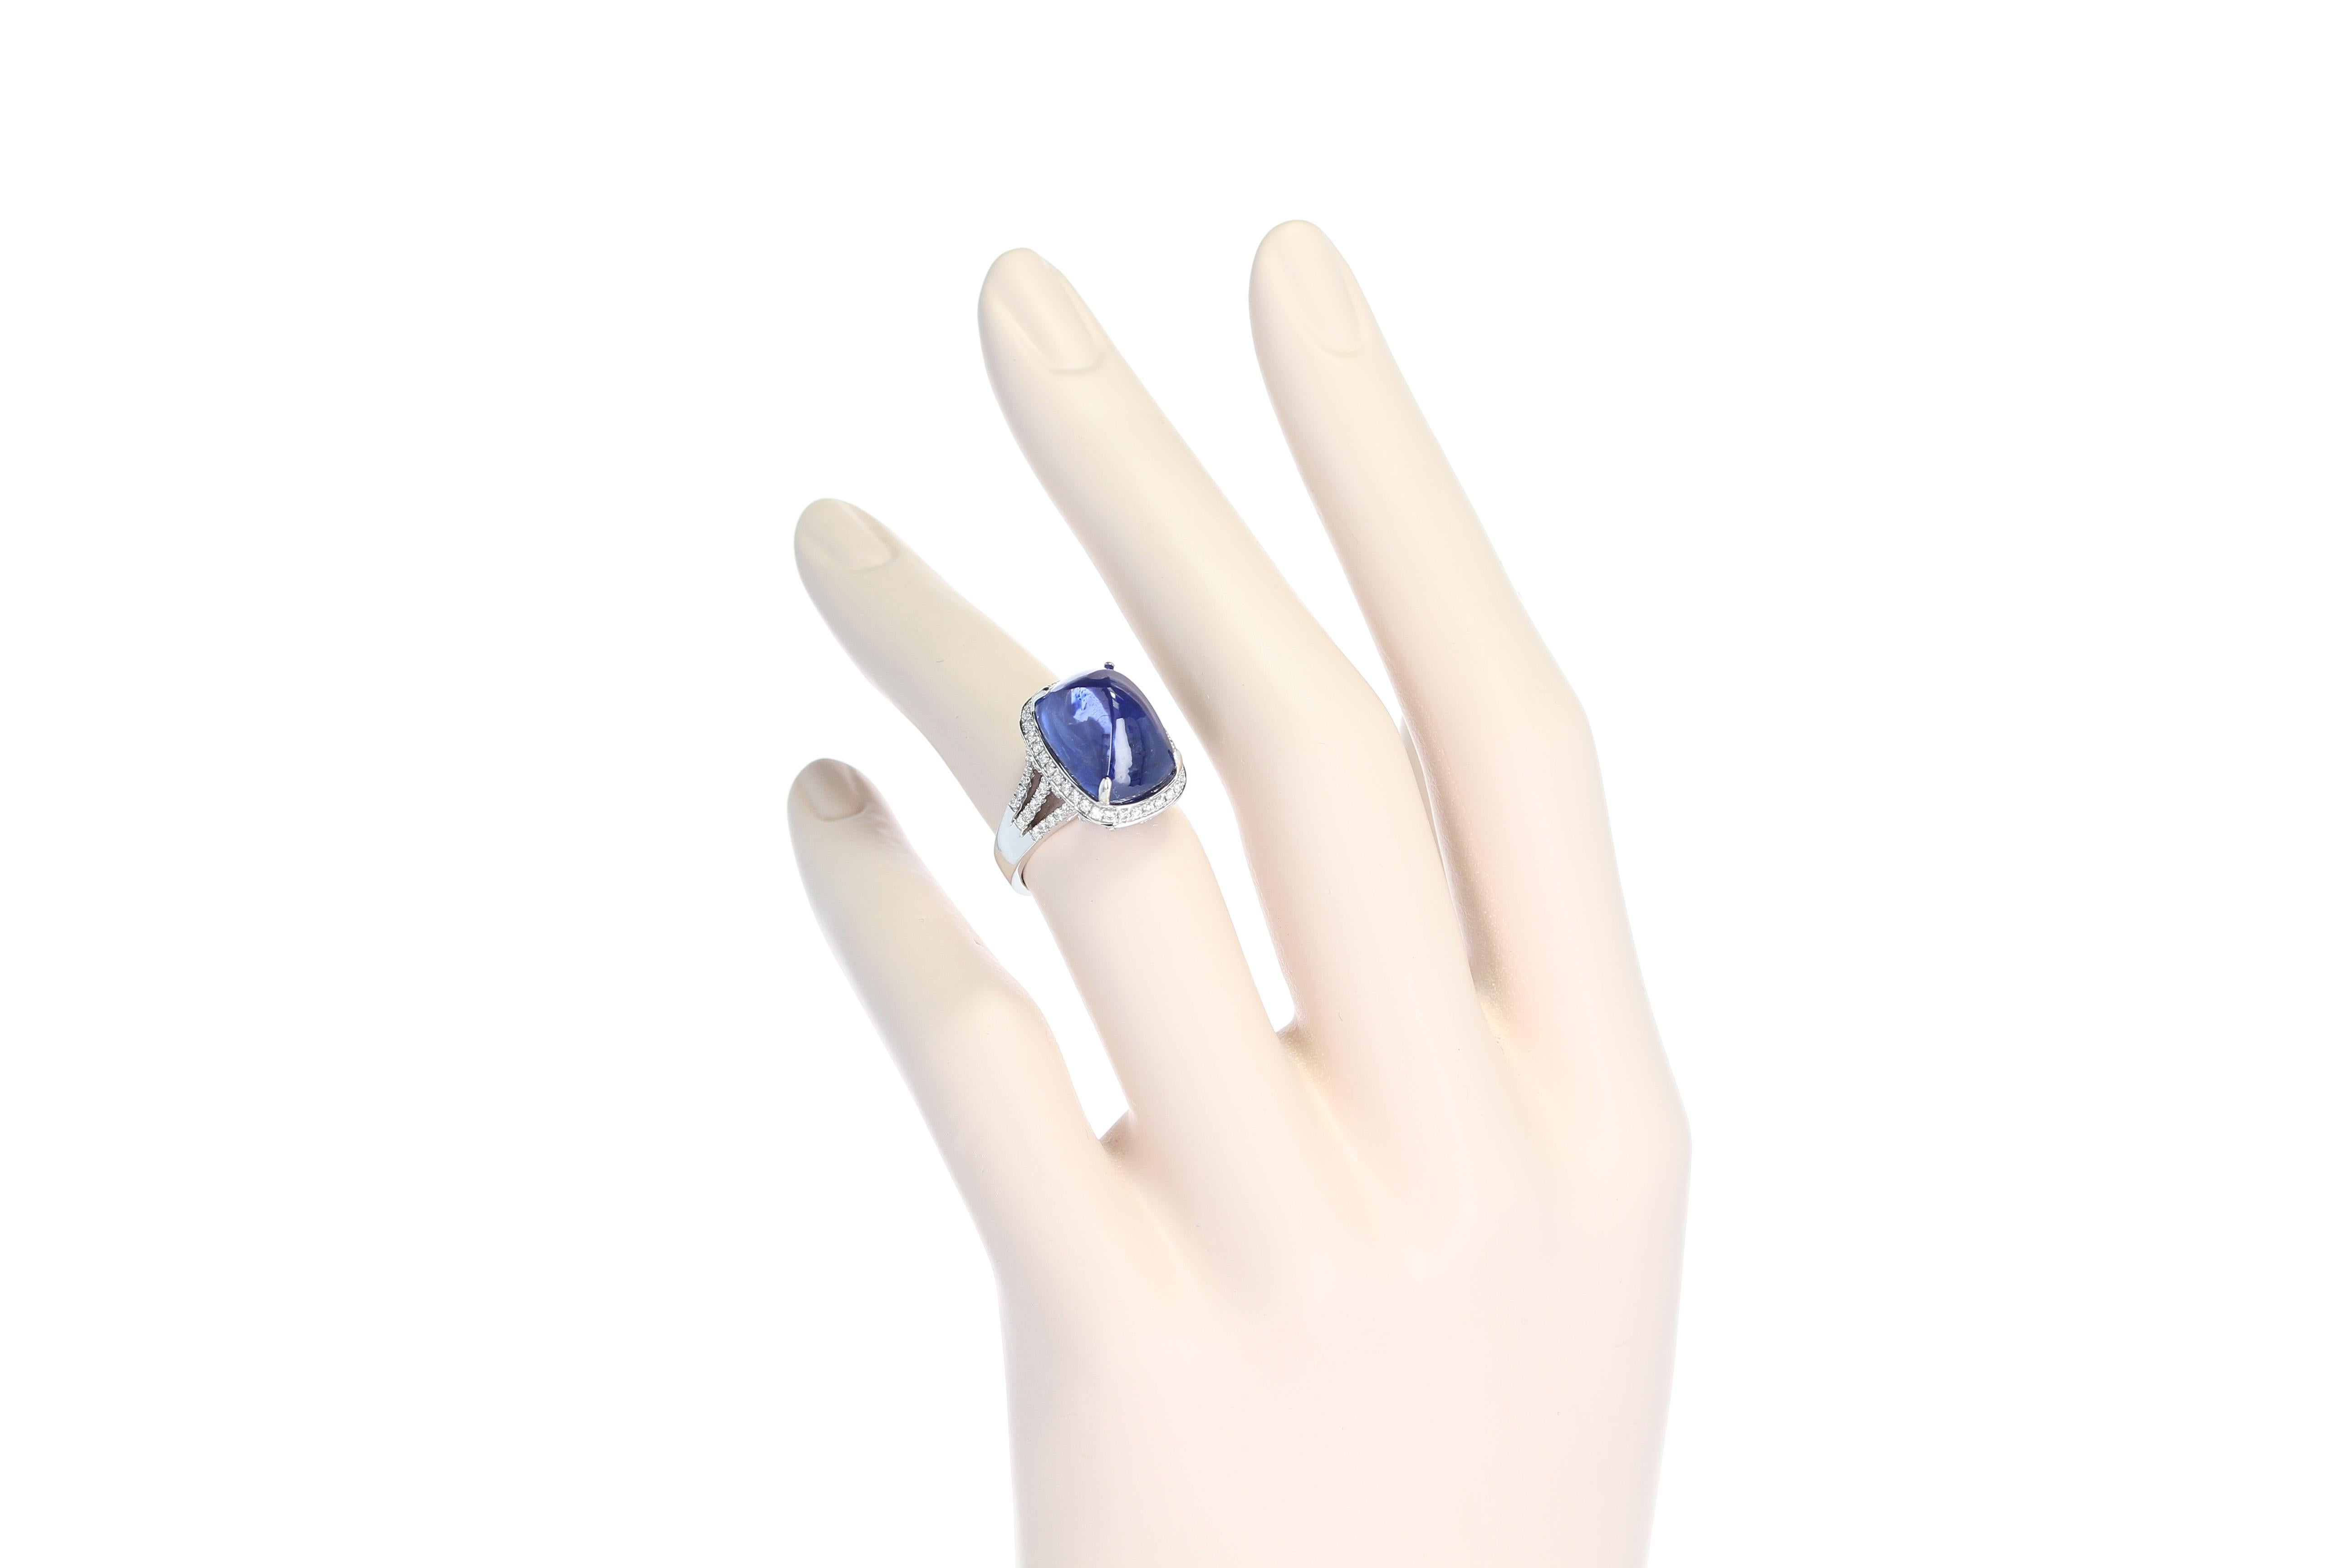 A 19.57 carat cushion-shape sugarlaof blue sapphire cabochon with diamonds, set in 18kt white gold. The sapphire accompanies a gemological report from GIA & GRS stating the country of origin as Ceylon (Sri Lanka) with No Heat Enhancement. Ring Size: